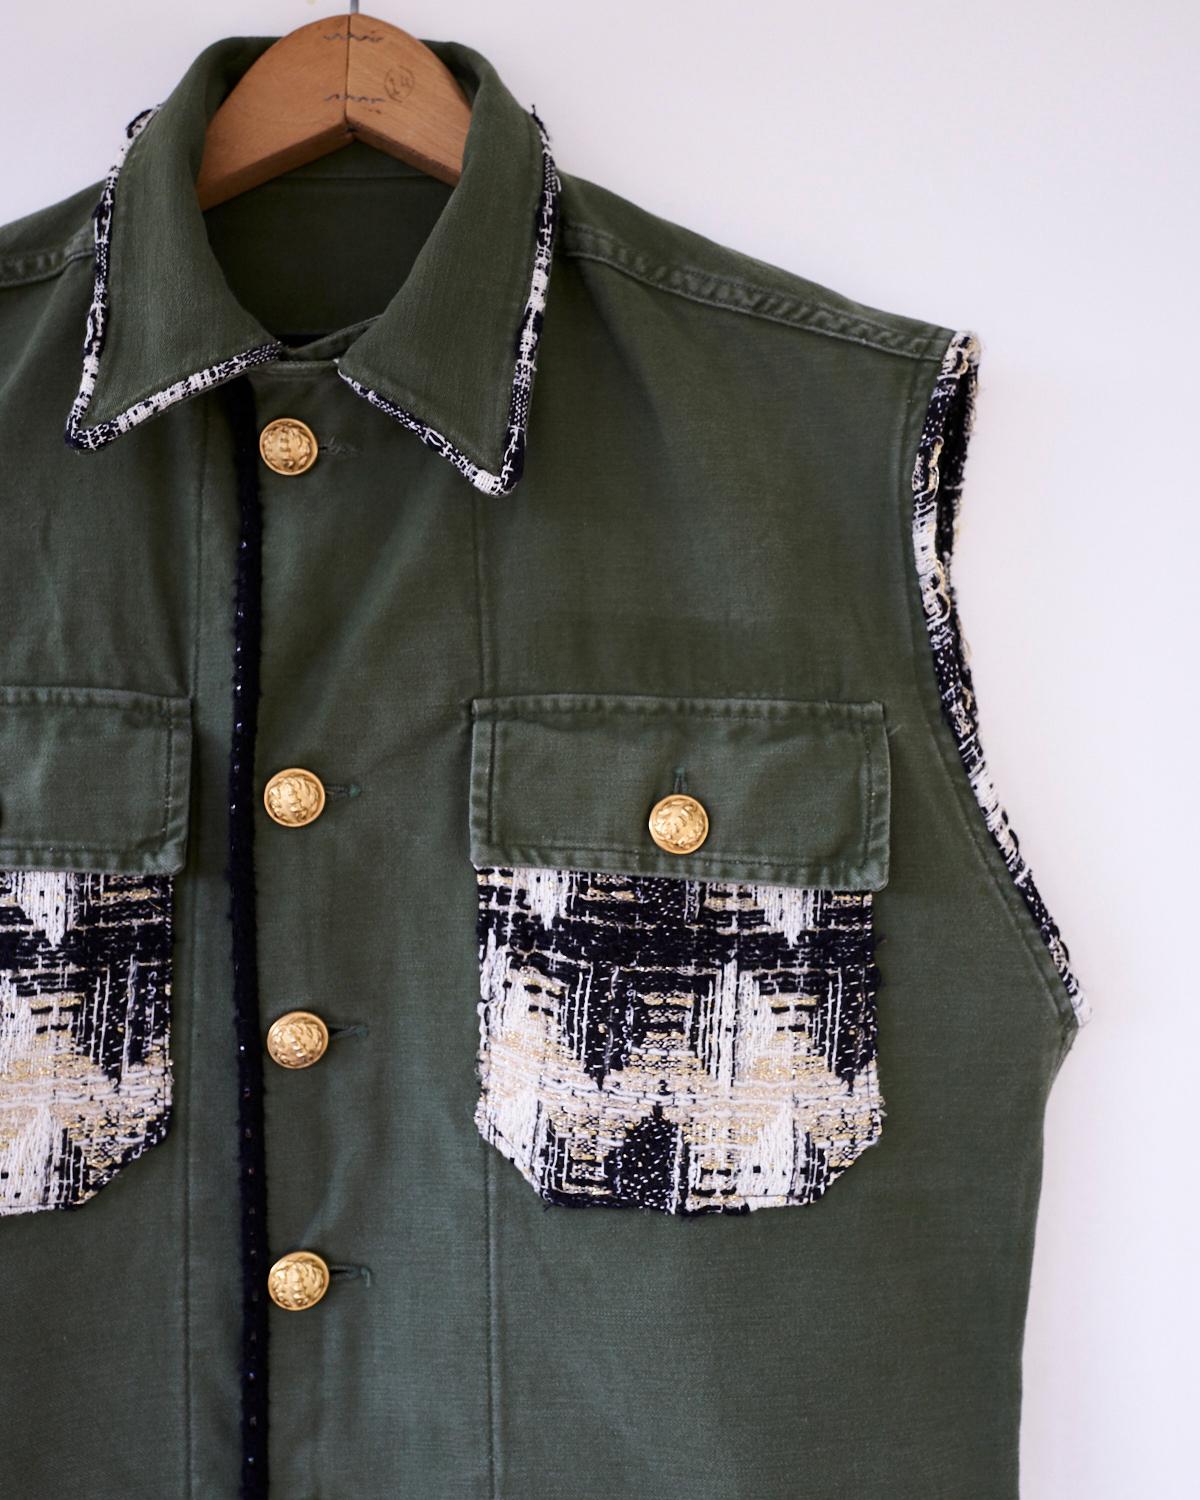 Vest Sleeveless Jacket Green Military  French Tweed Embellished J Dauphin

Repurposed and Embellished Sleeveless Jacket Vest Green Military with Original WW2 Gold Buttons from France and Trim of French Black Beige Gold Lurex Tweed 
J